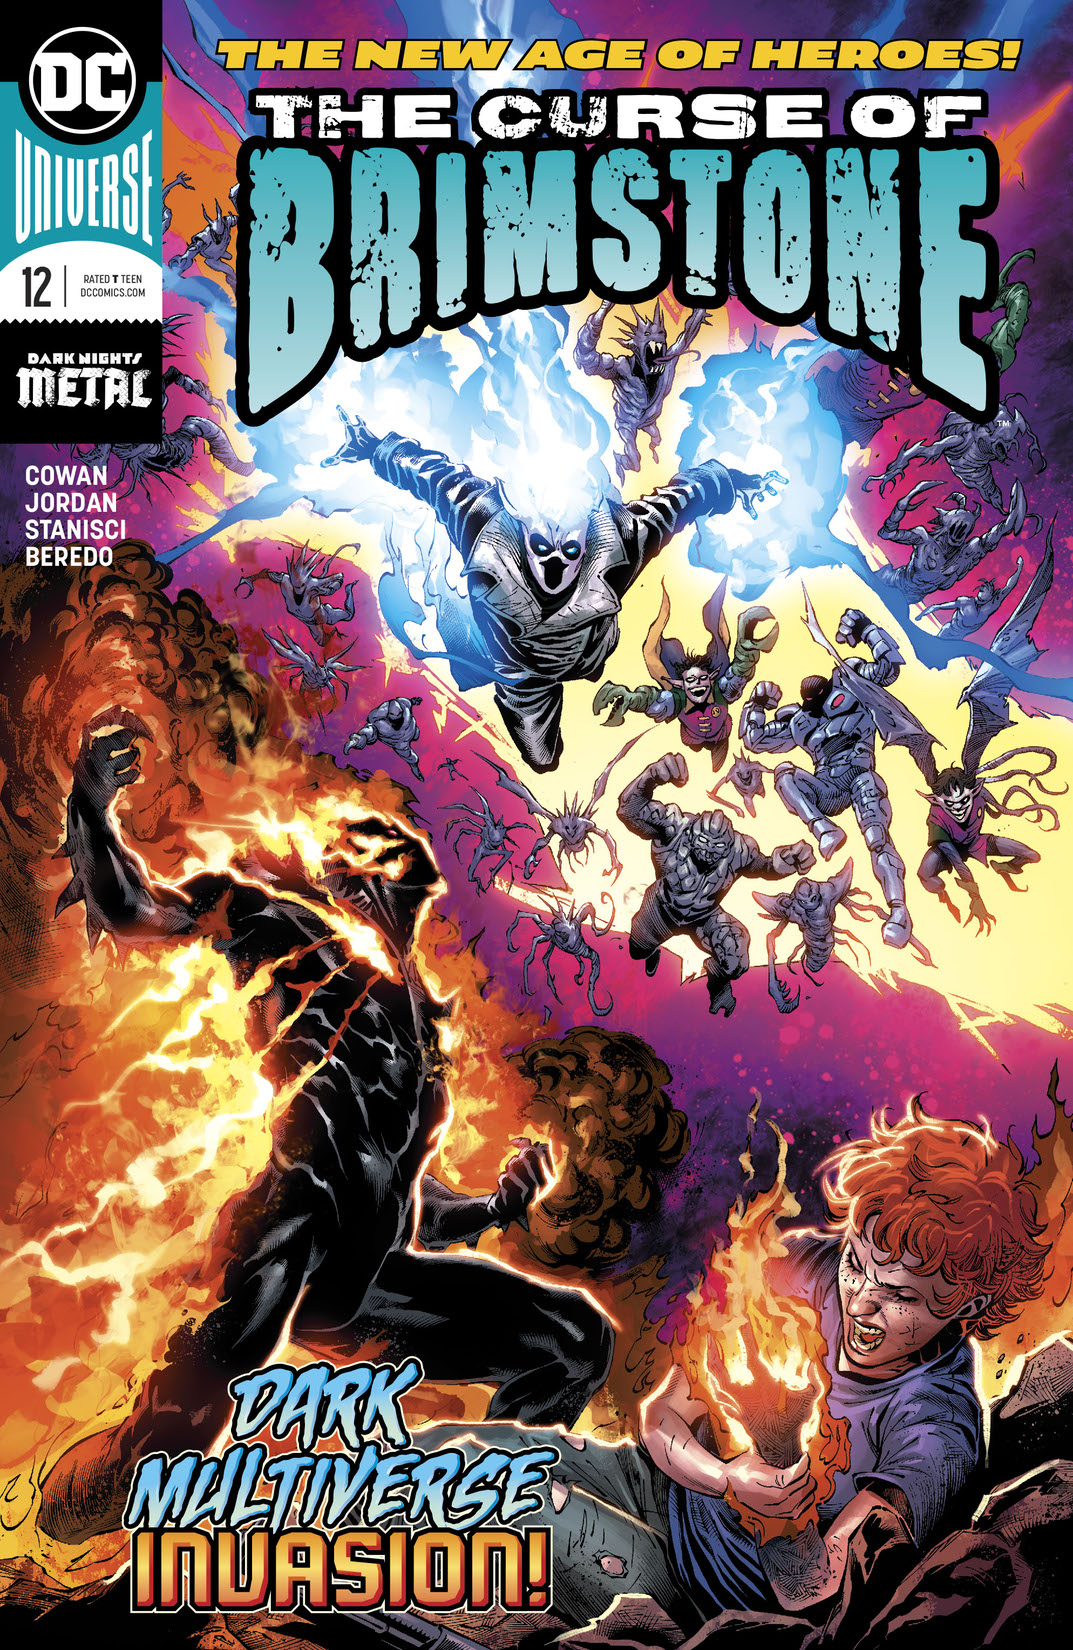 The Curse of Brimstone #12 preview images